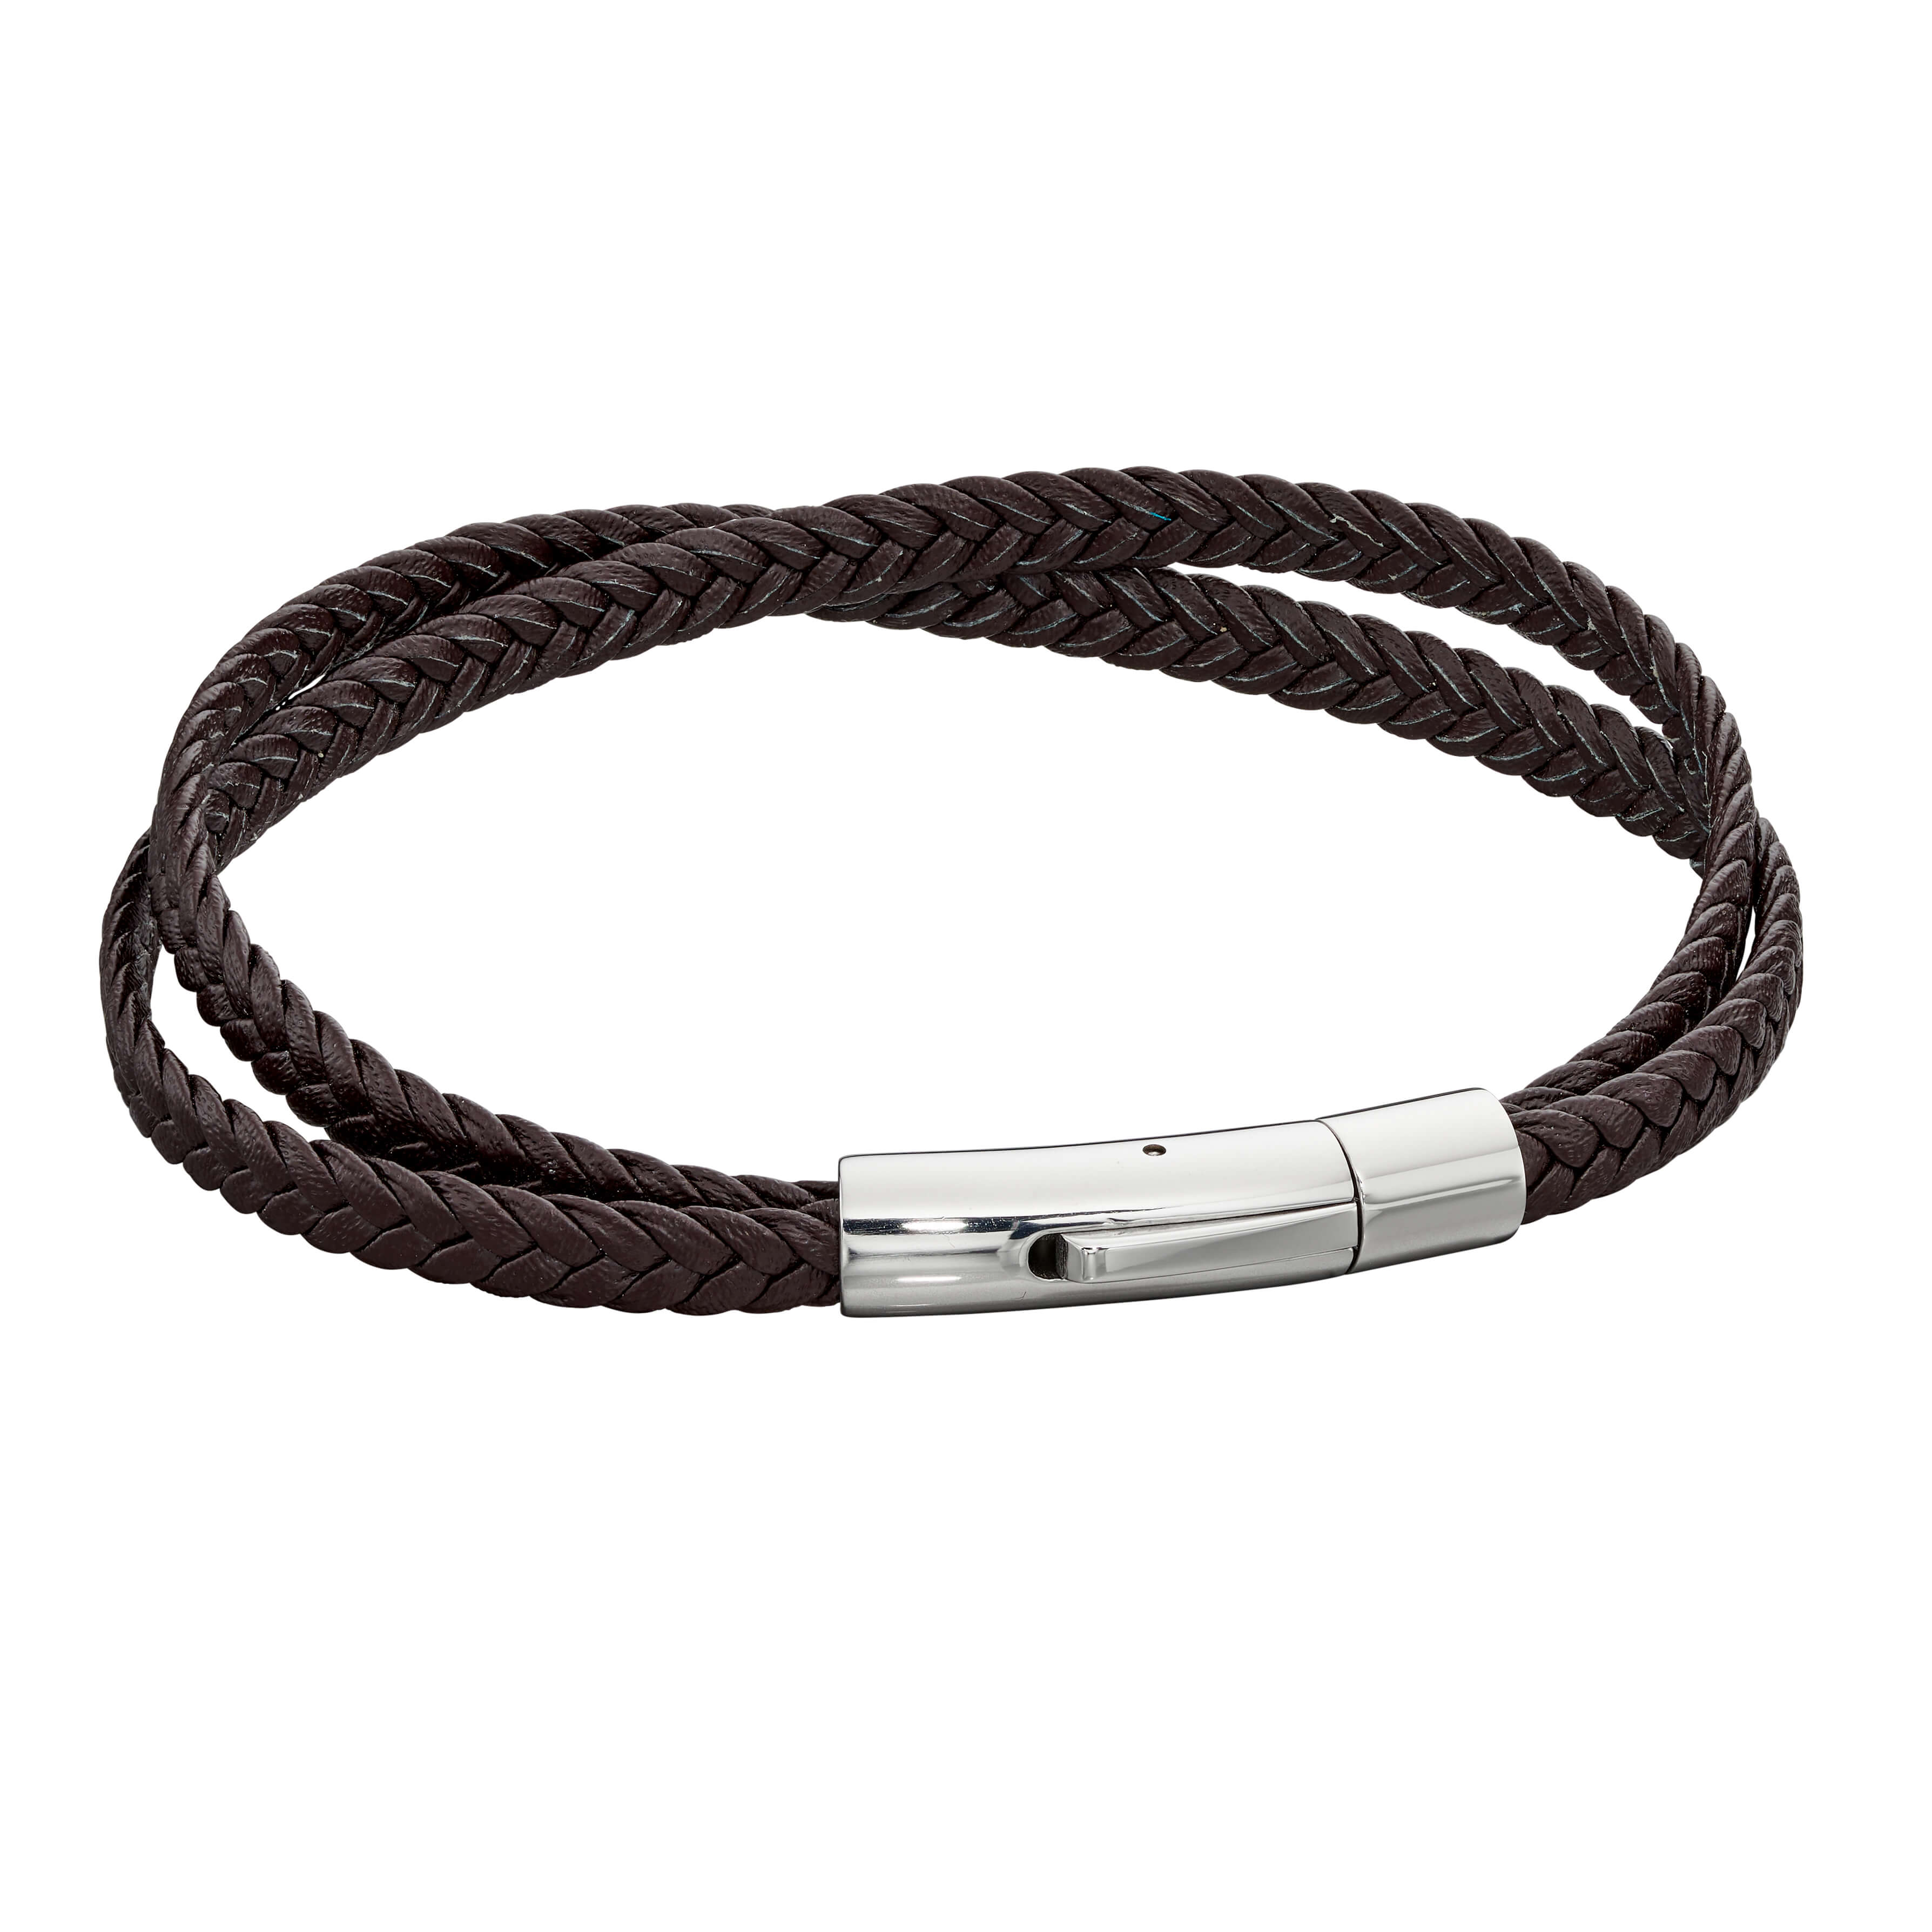 Stainless Steel & Black Plaited Leather Crossover Bracelet - FB0020 - Hallmark Jewellers Formby & The Jewellers Bench Widnes